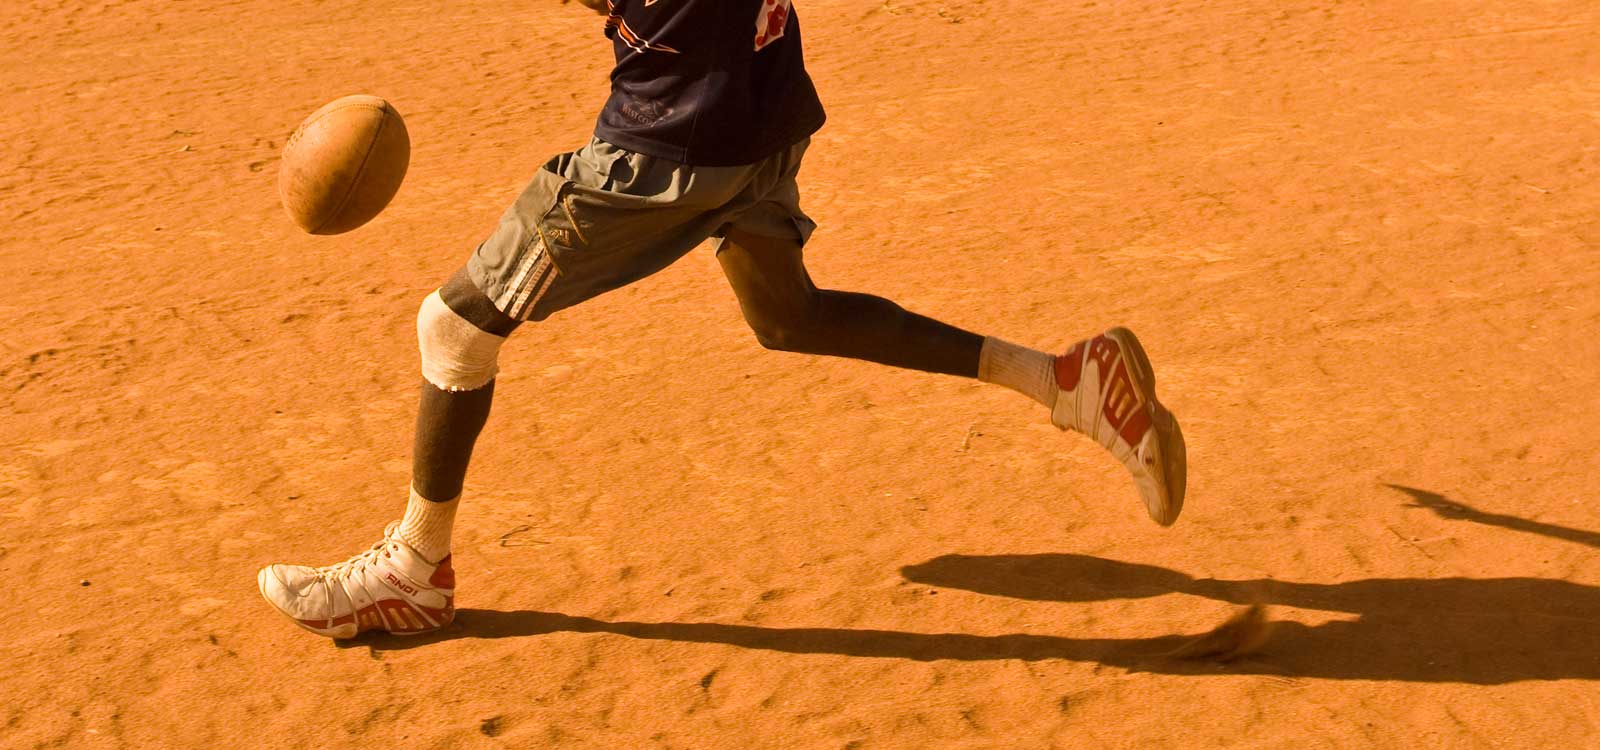 image of AARONTAIT COPYRIGHTED 2014 5312 EDITORIAL DOCUMENTARY PHOTOGRAPHER PAPUNYA NORTHERN TERRITORY AUSTRALIA LANDSCAPE LIFE PEOPLE ART INDIGENOUS PINTUPI LURITJA PAPUNYA TULA FOOTY BOOTS RUNNING RED CENTRE